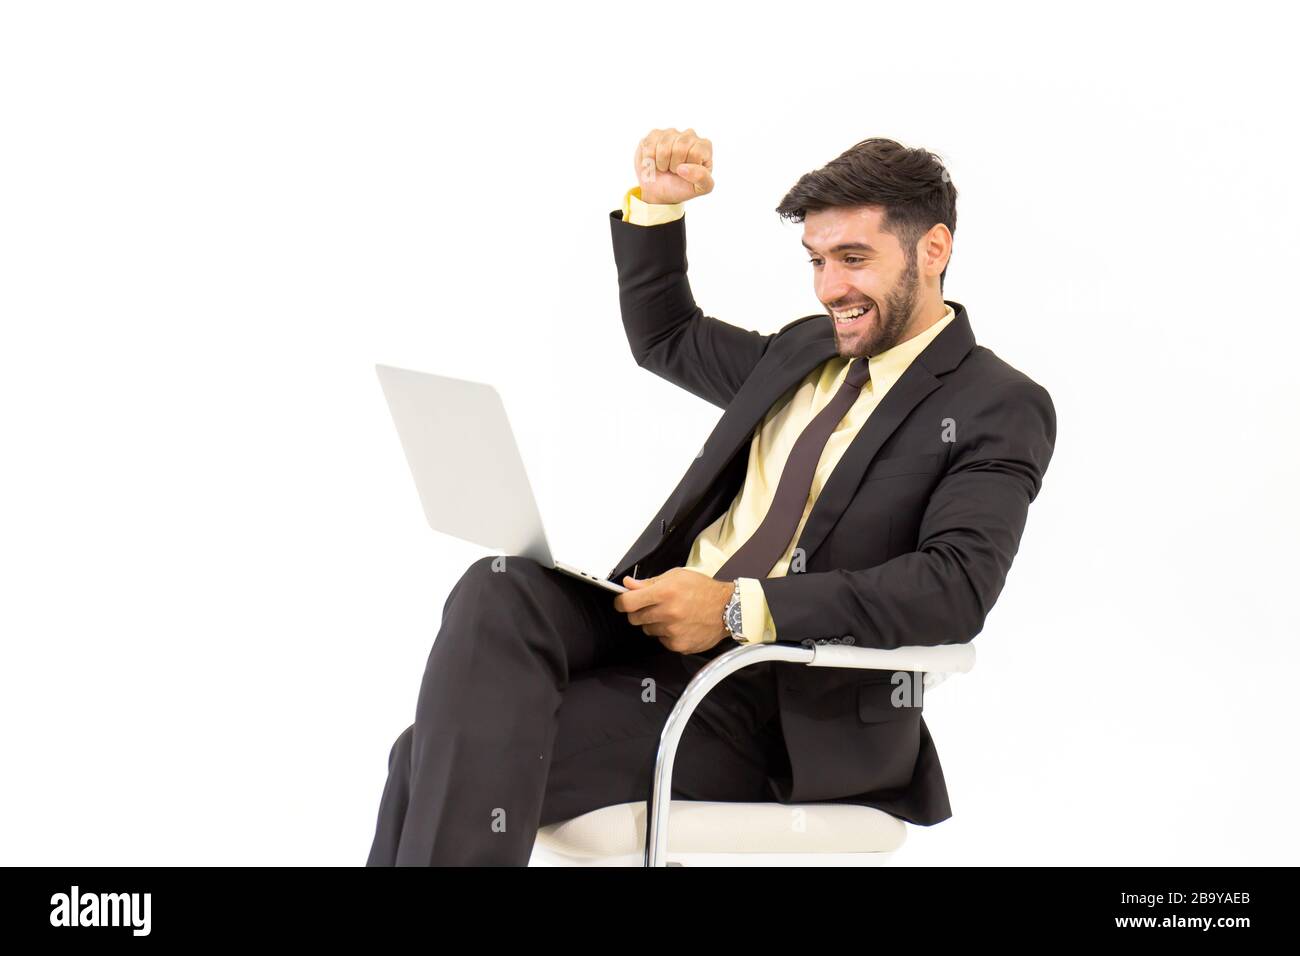 A handsome businessman sitting on a chair showing signs of happiness, isolated on white background, Stock Photo